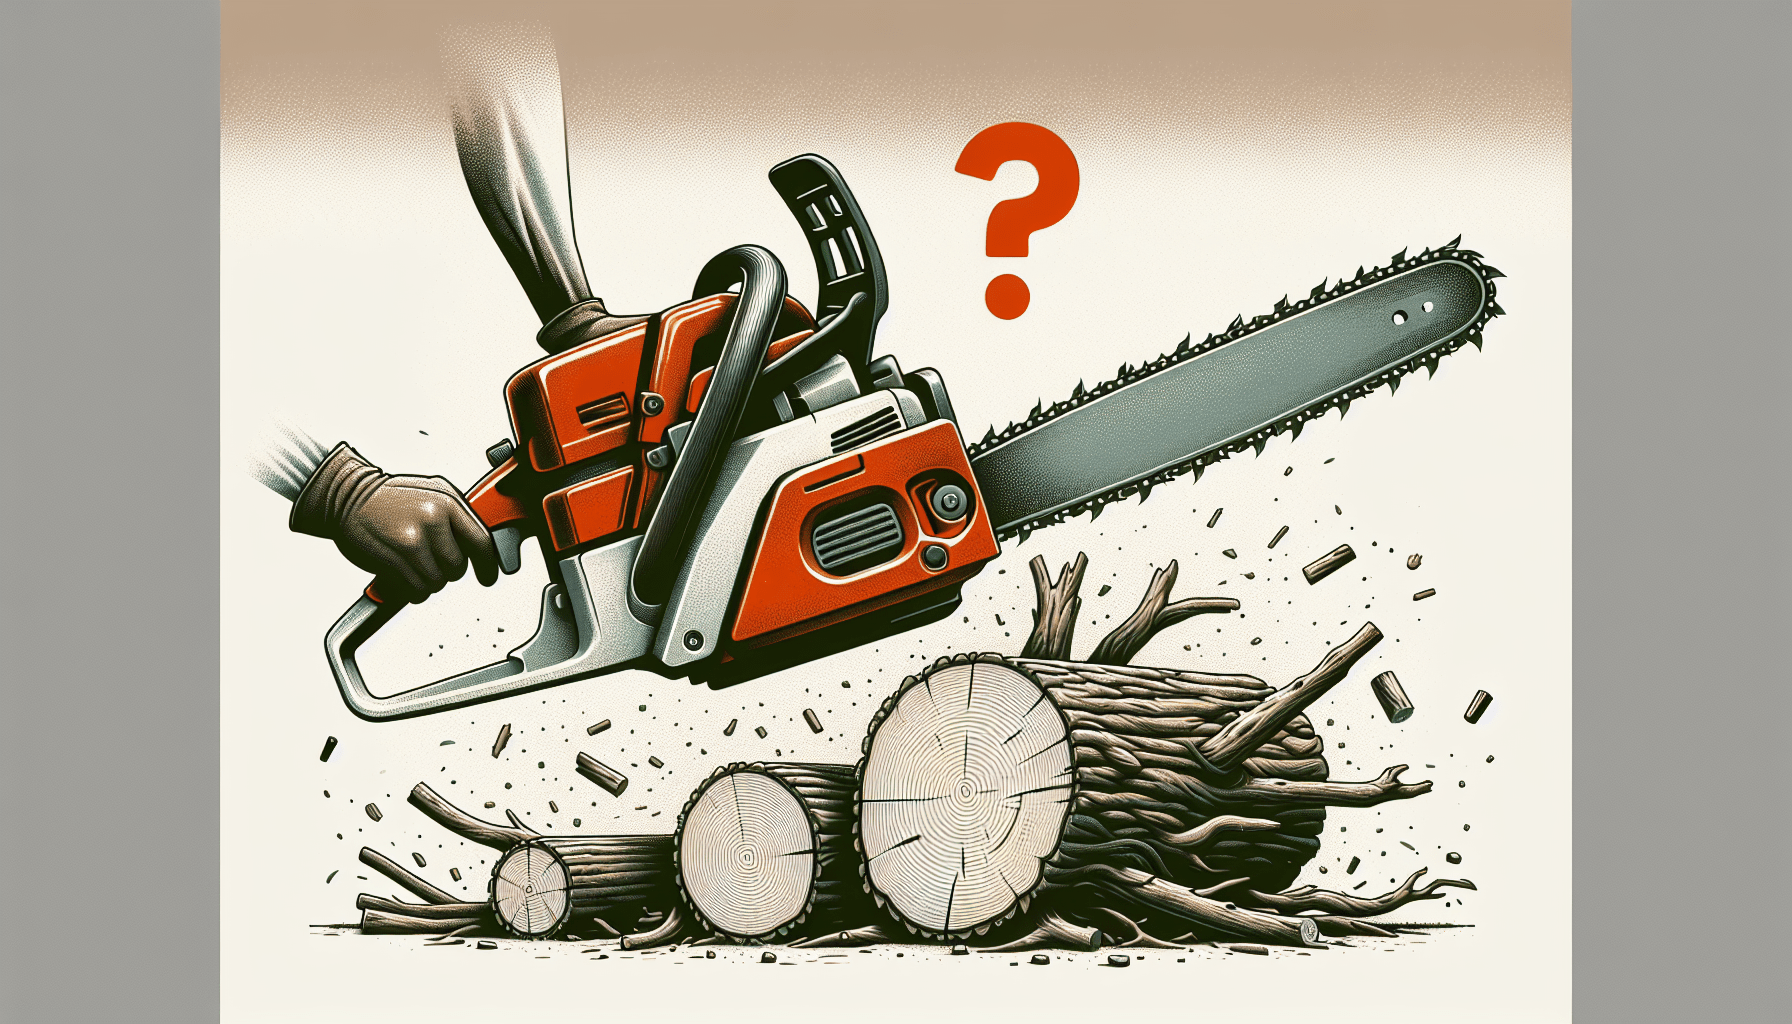 Which Tool Is Mostly Used To Cut Trees?